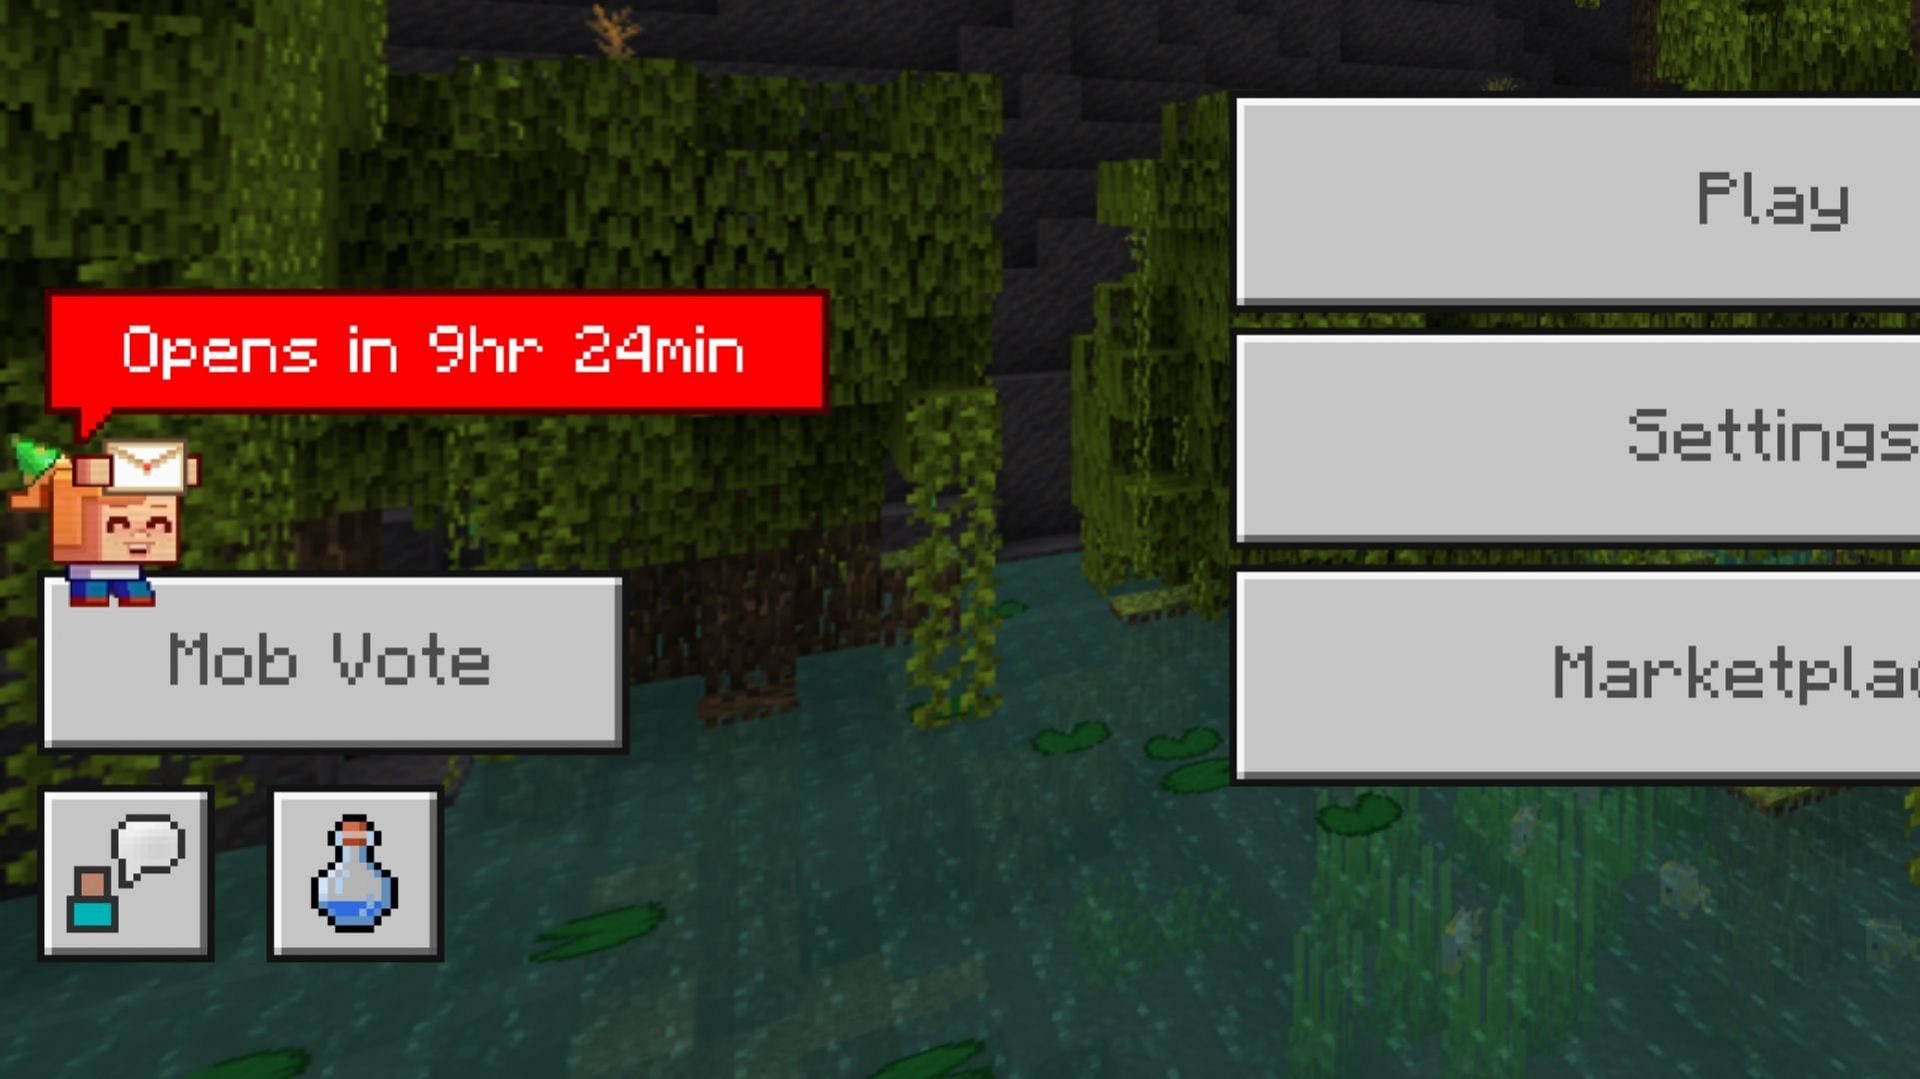 The latest version of Bedrock Edition will have a mob vote button on the main menu (Image via Mojang)